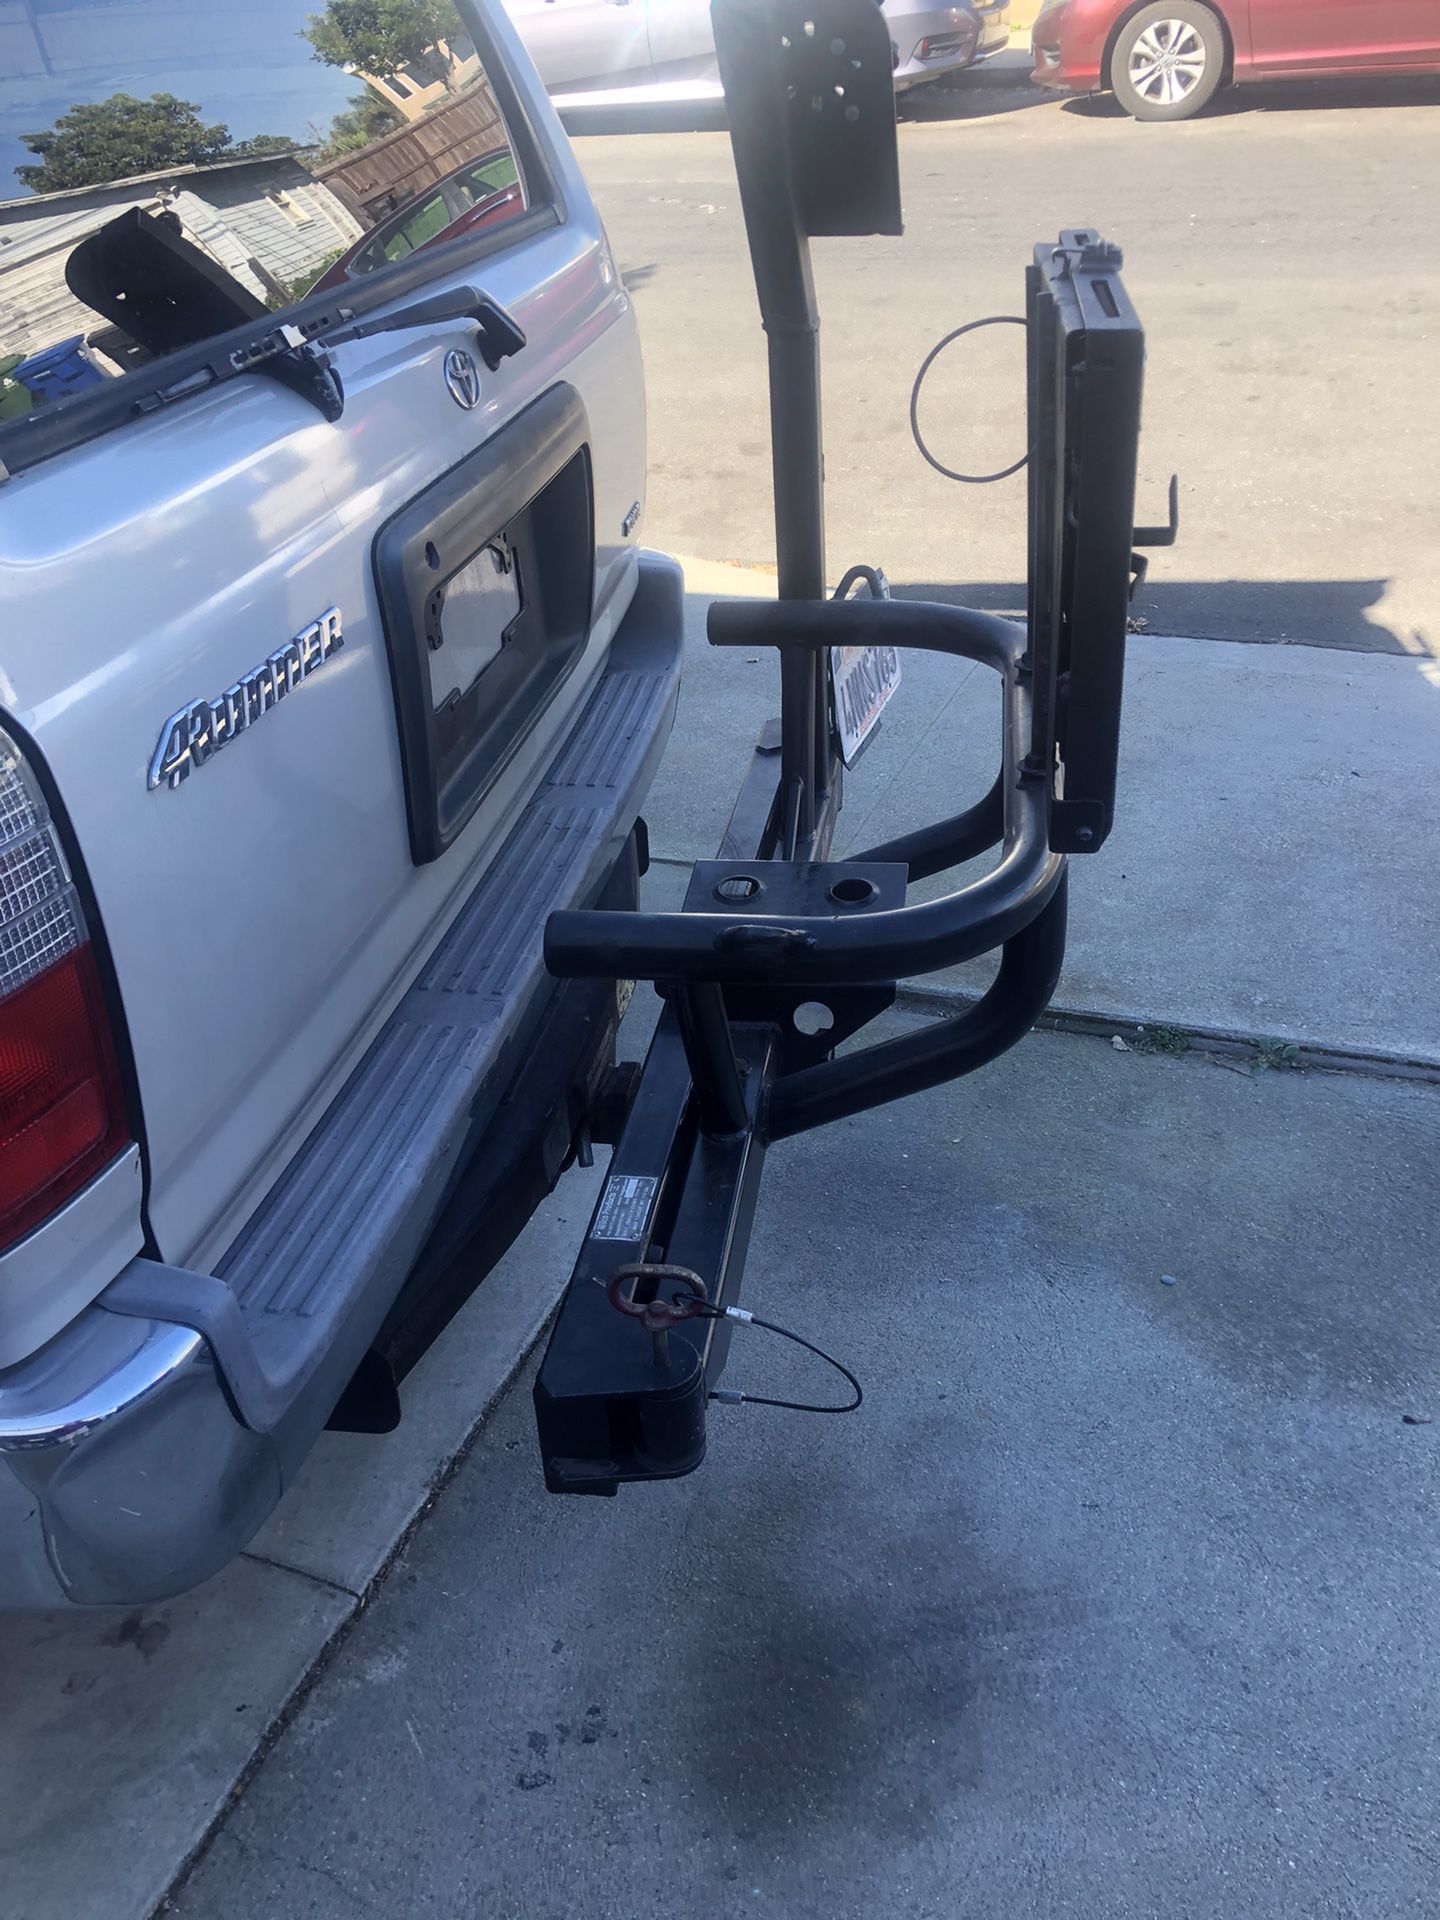 Wilco Max Trailer Toyota 4Runner Tire Gate Carrier With Additional Features